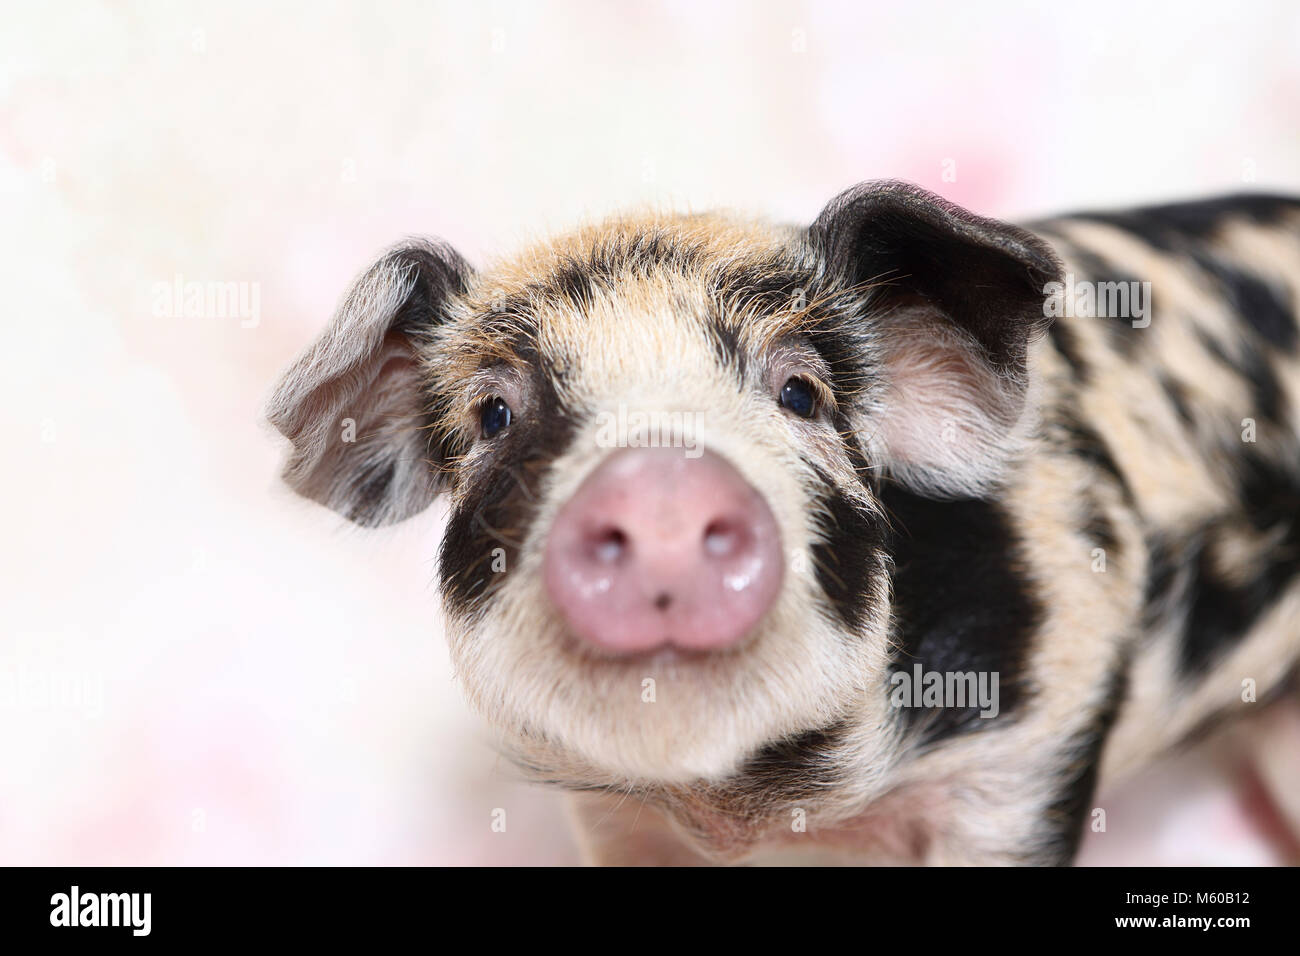 Domestic Pig, Turopolje x ?. Portrait of piglet (4 weeks old). Studio picture seen against a white background with flower print. Germany Stock Photo